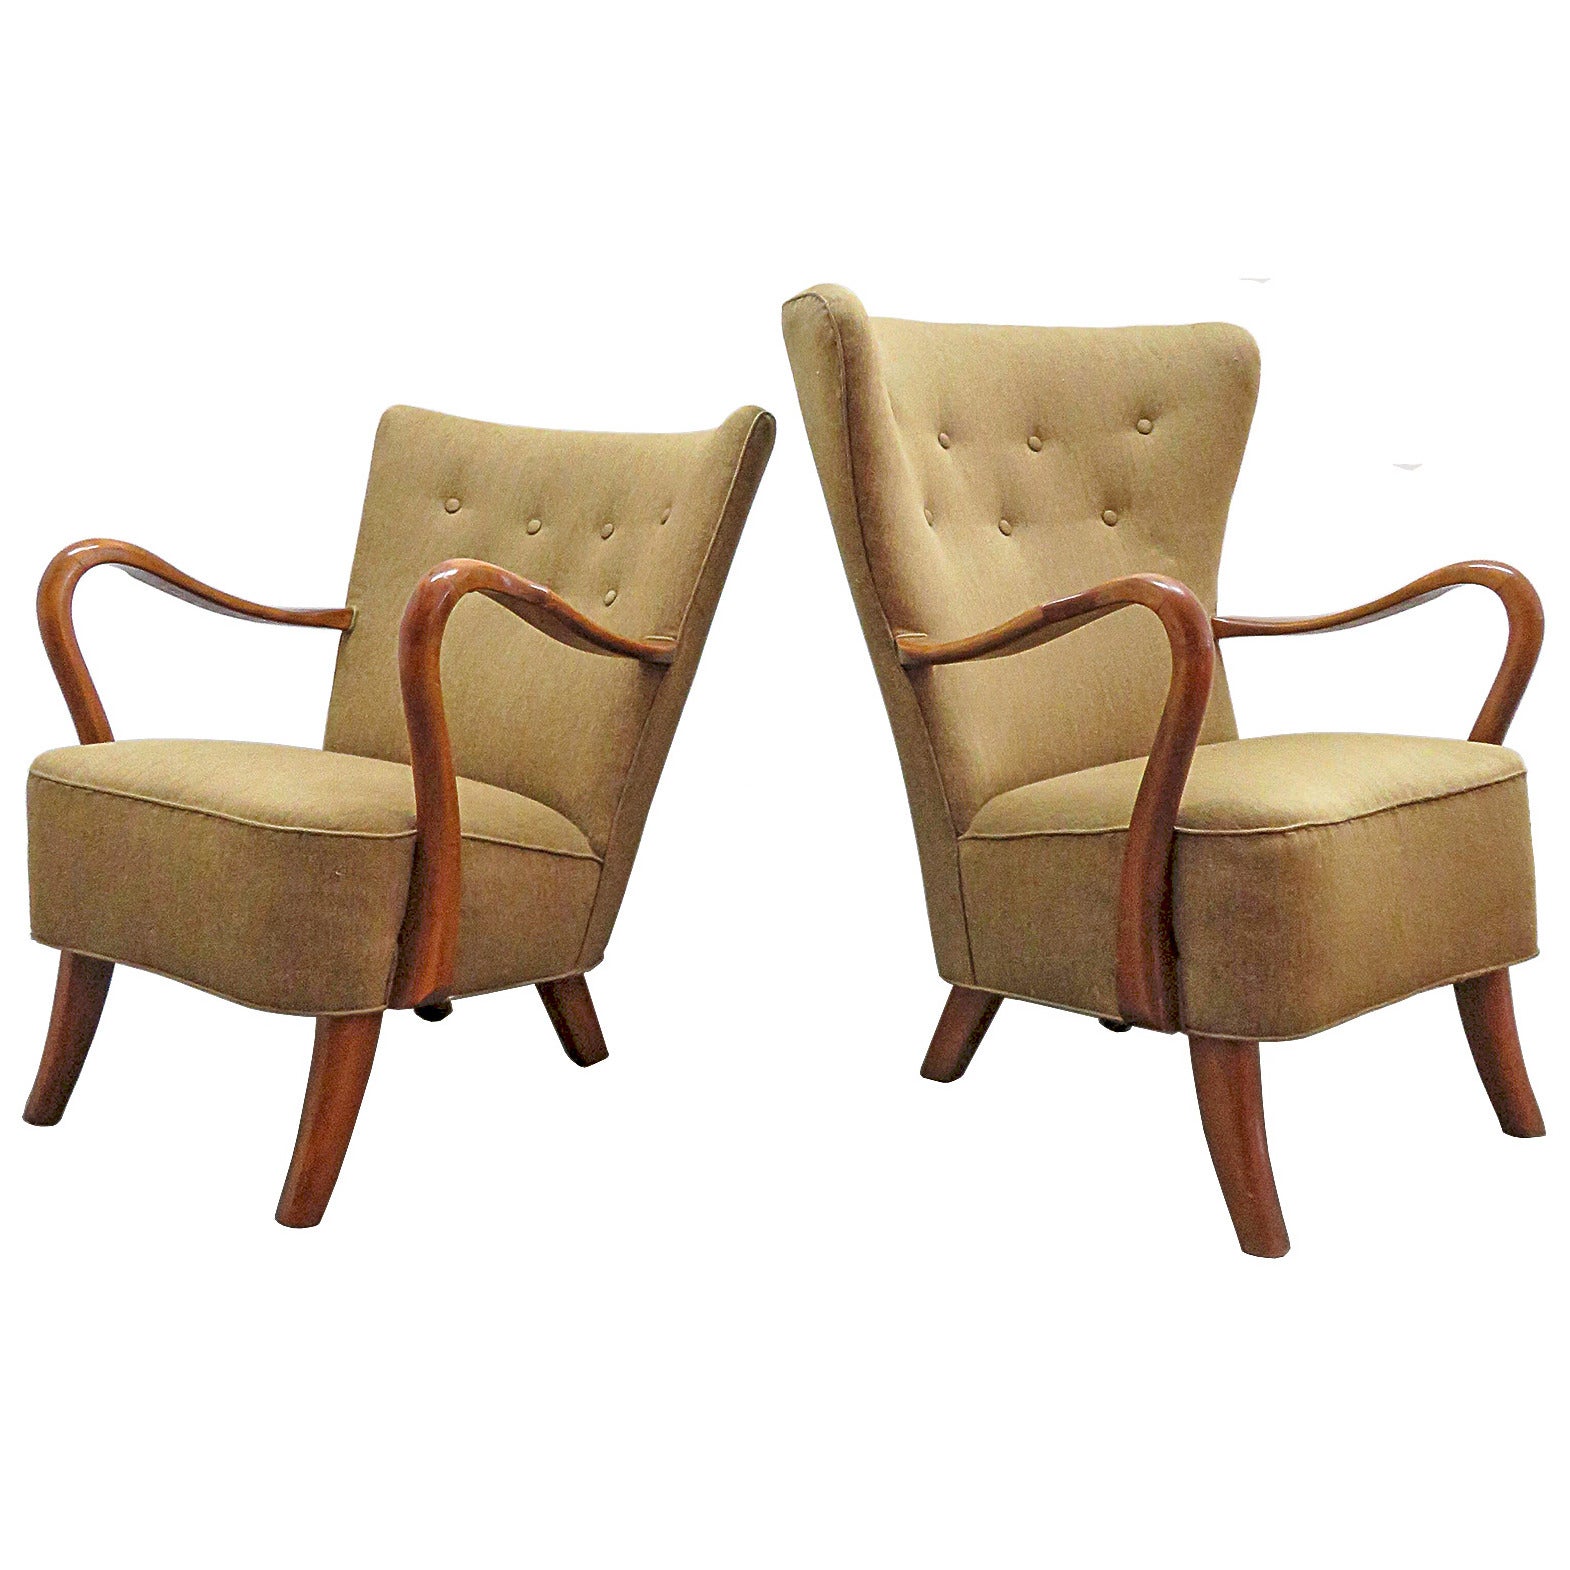 Pair of Alfred Christensen Lounge Chairs, 1940